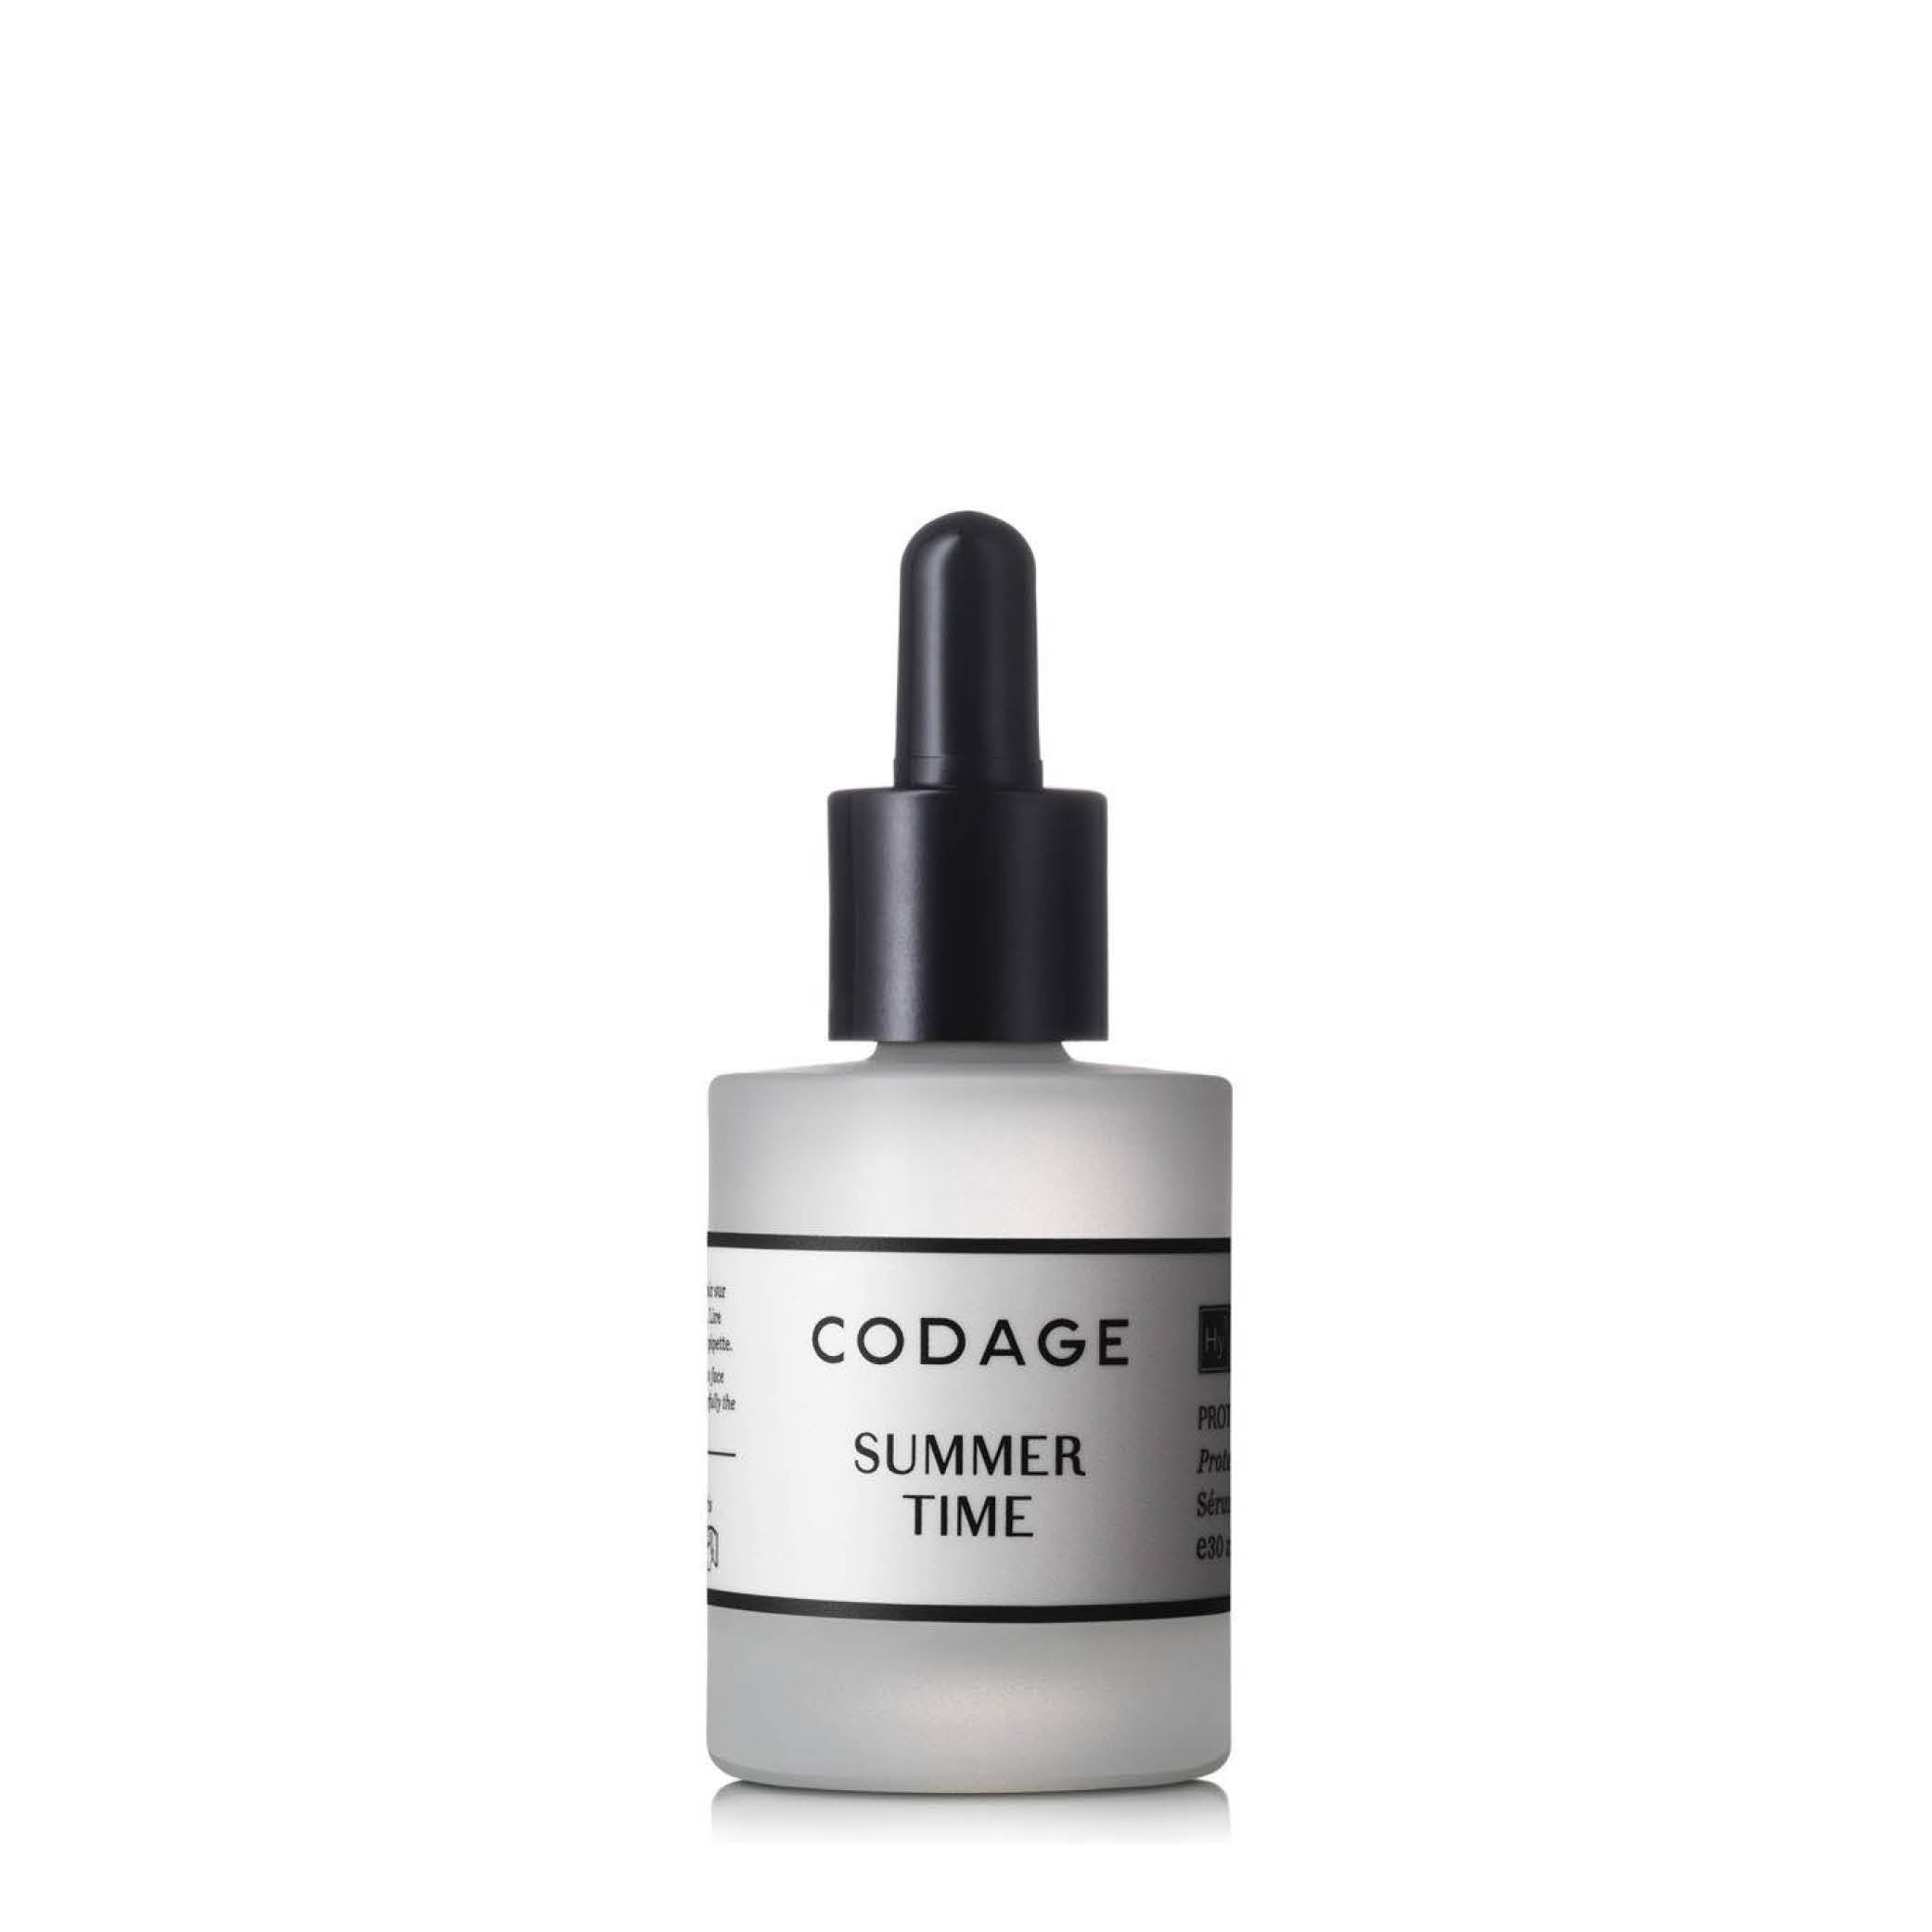 SERUM SUMMER TIME - Protecting & Activating